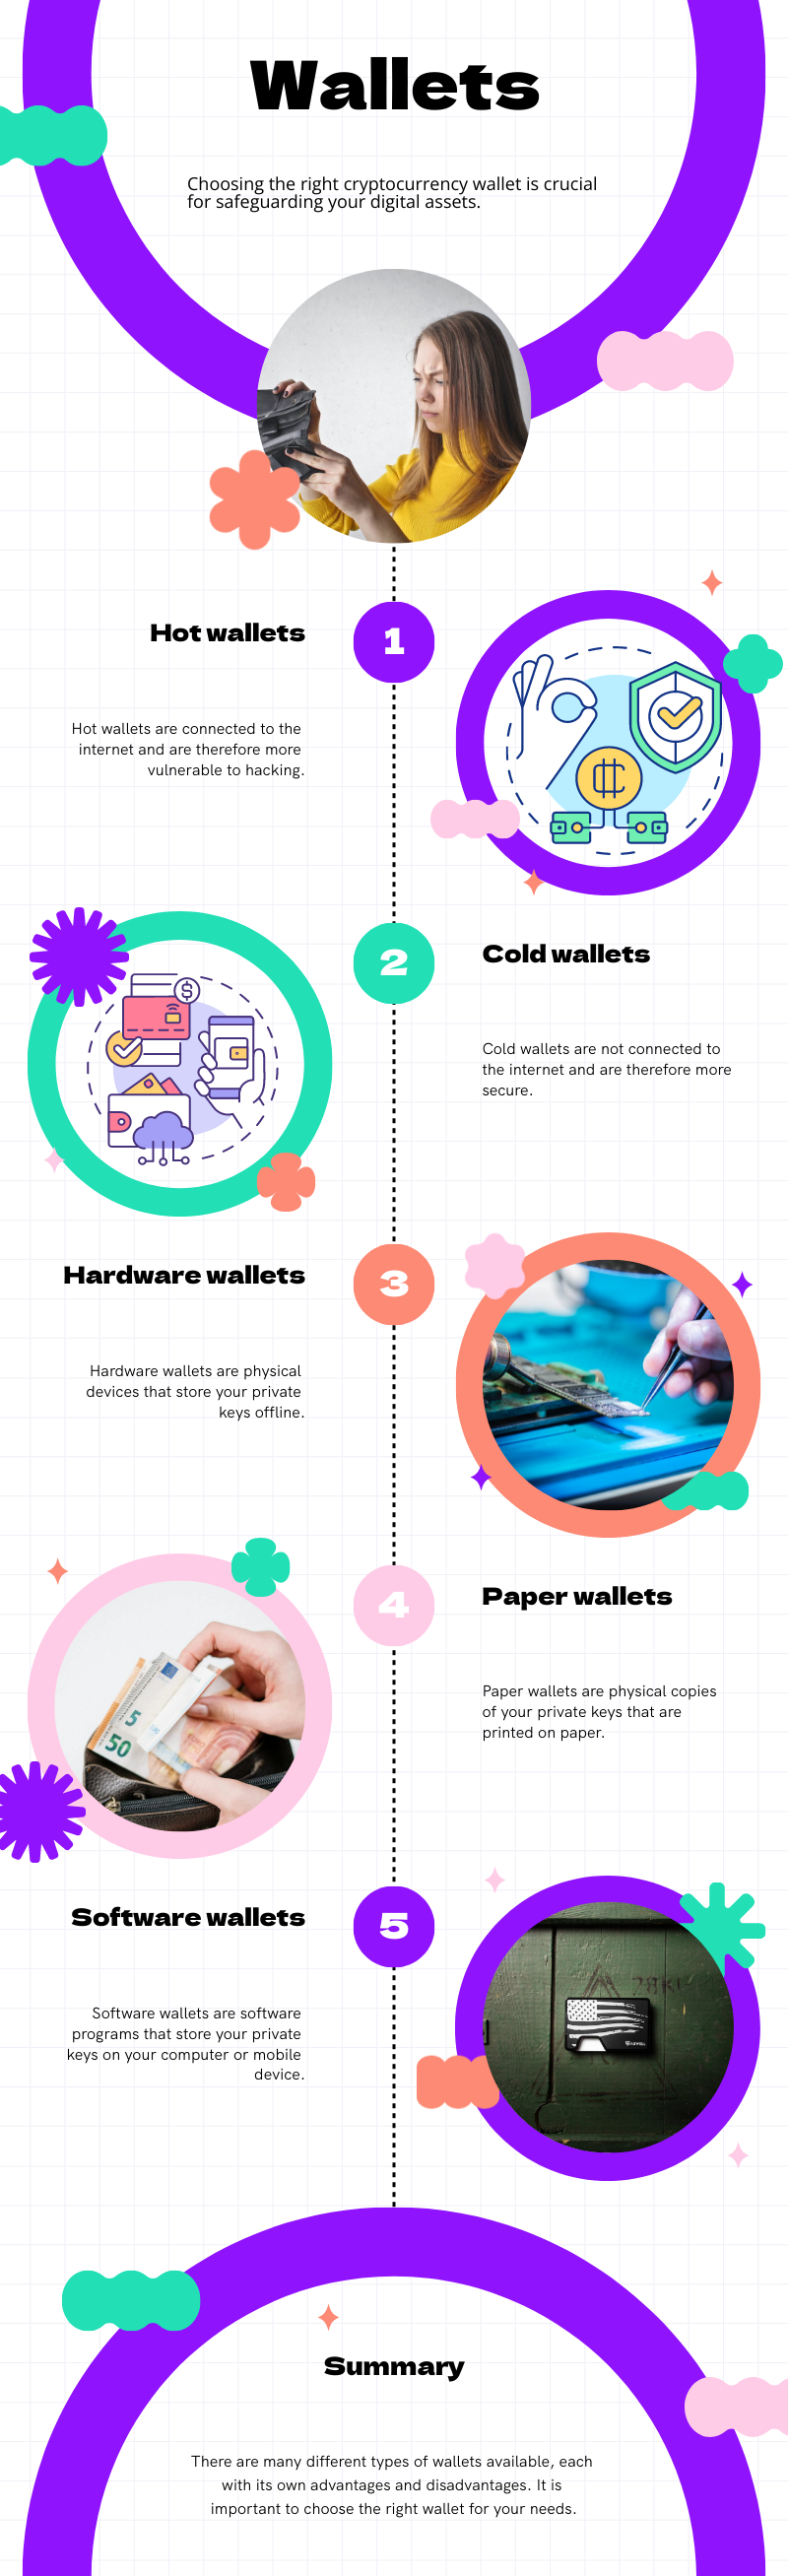 Infographic titled 'Wallets' outlines different types of cryptocurrency wallets. It details hot wallets as internet-connected and vulnerable, cold wallets as more secure offline storage, hardware wallets as physical devices for private key storage, paper wallets as printed private keys, and software wallets as computer or mobile applications. 